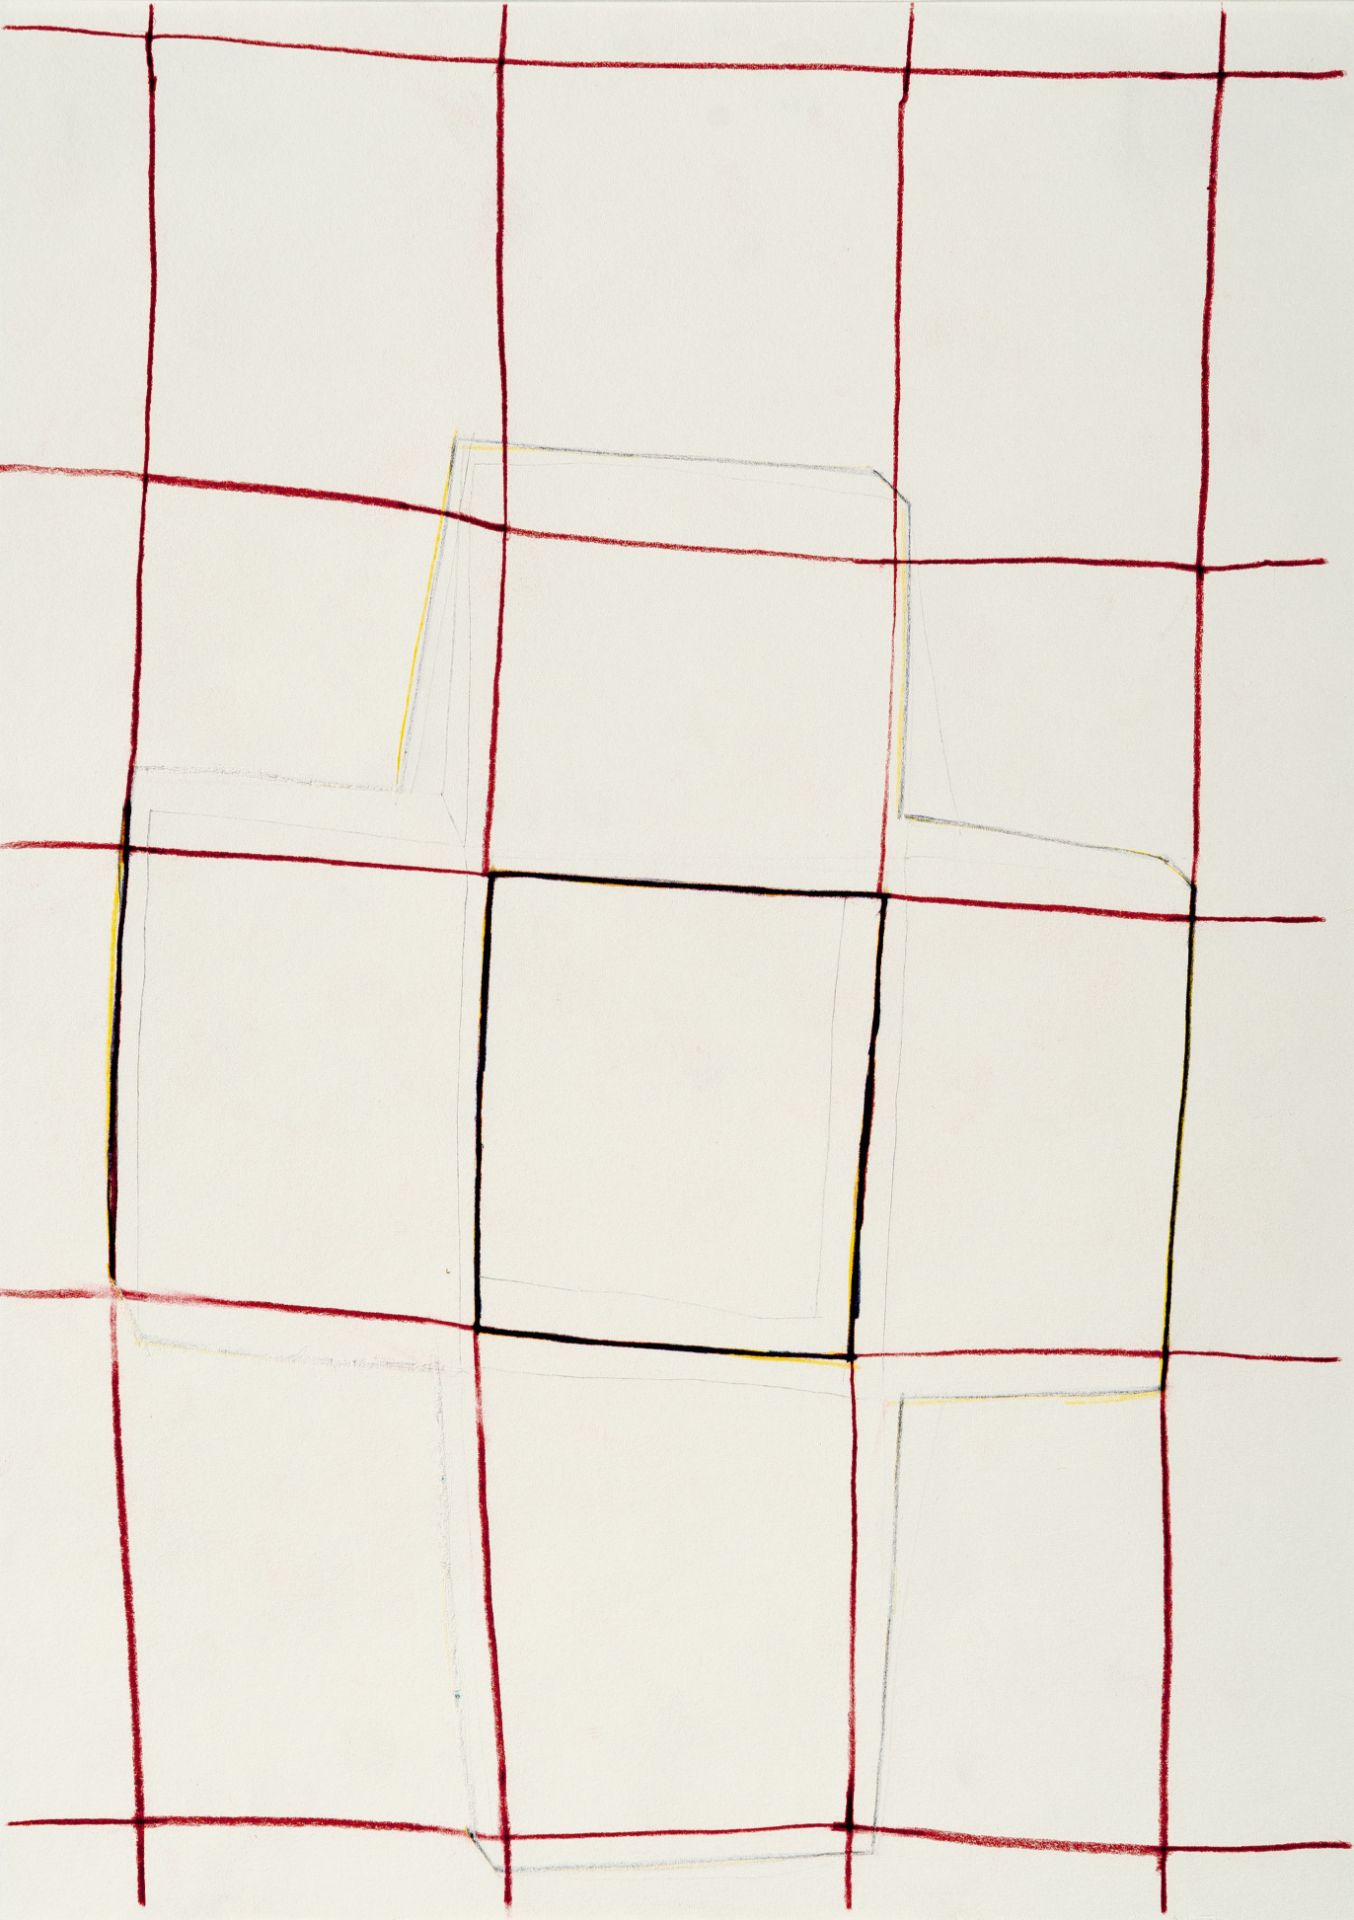 German Stegmaier, Untitled ("F62").Coloured pencil and pencil on wove. 2001. Ca. 27.5 x 19.5 cm.